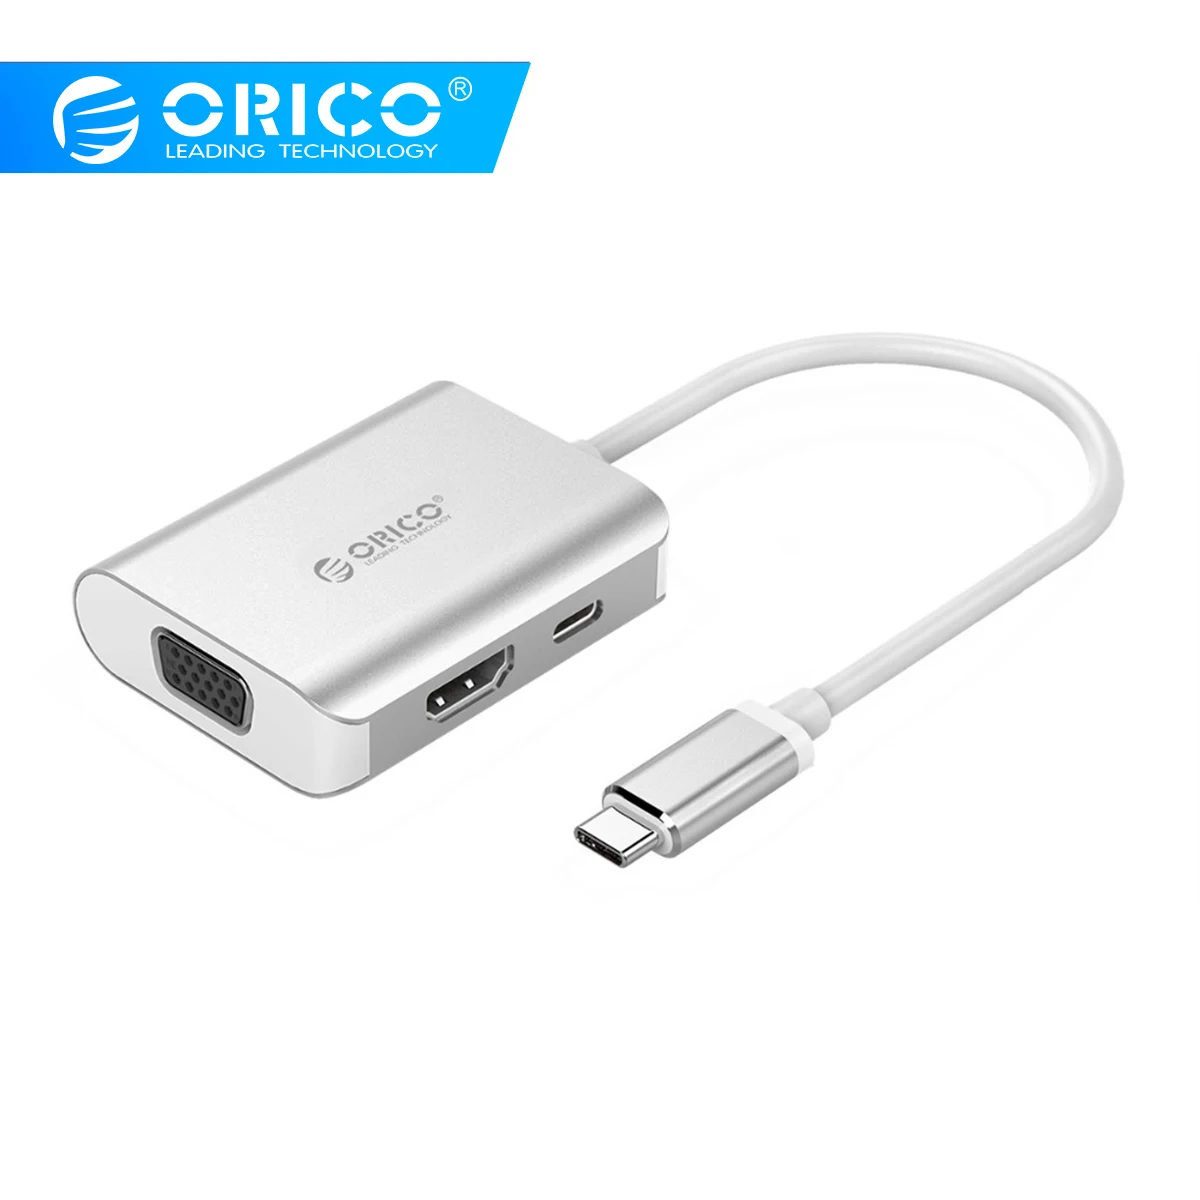 ORICO usb-хаб USB C к HDMI VGA для MacBook samsung Galaxy S9 S8 Note 8 huawei mate 10 P20 type C USB 3,1 концентратор